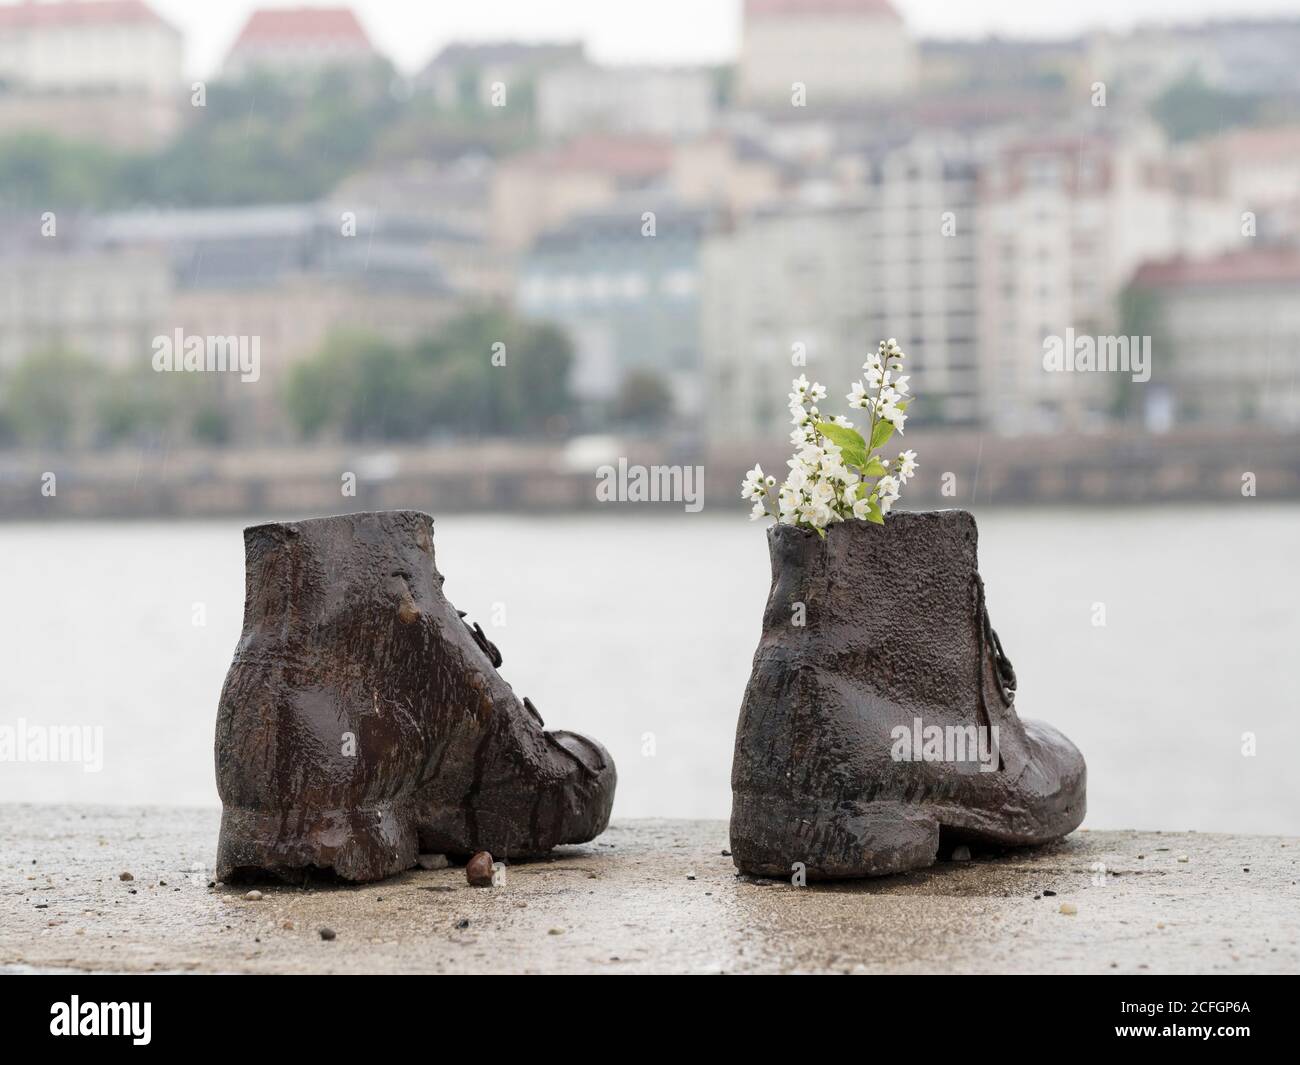 Detail from an iron sculpture of shoes along the Danube embankment. It is in memory of the victims shot into the Danube by Arrow Cross militiamen in 1944–45. Concieved by Can Togay and sculpted and erected 16 April 2005 by Gyula Pauer. Stock Photo